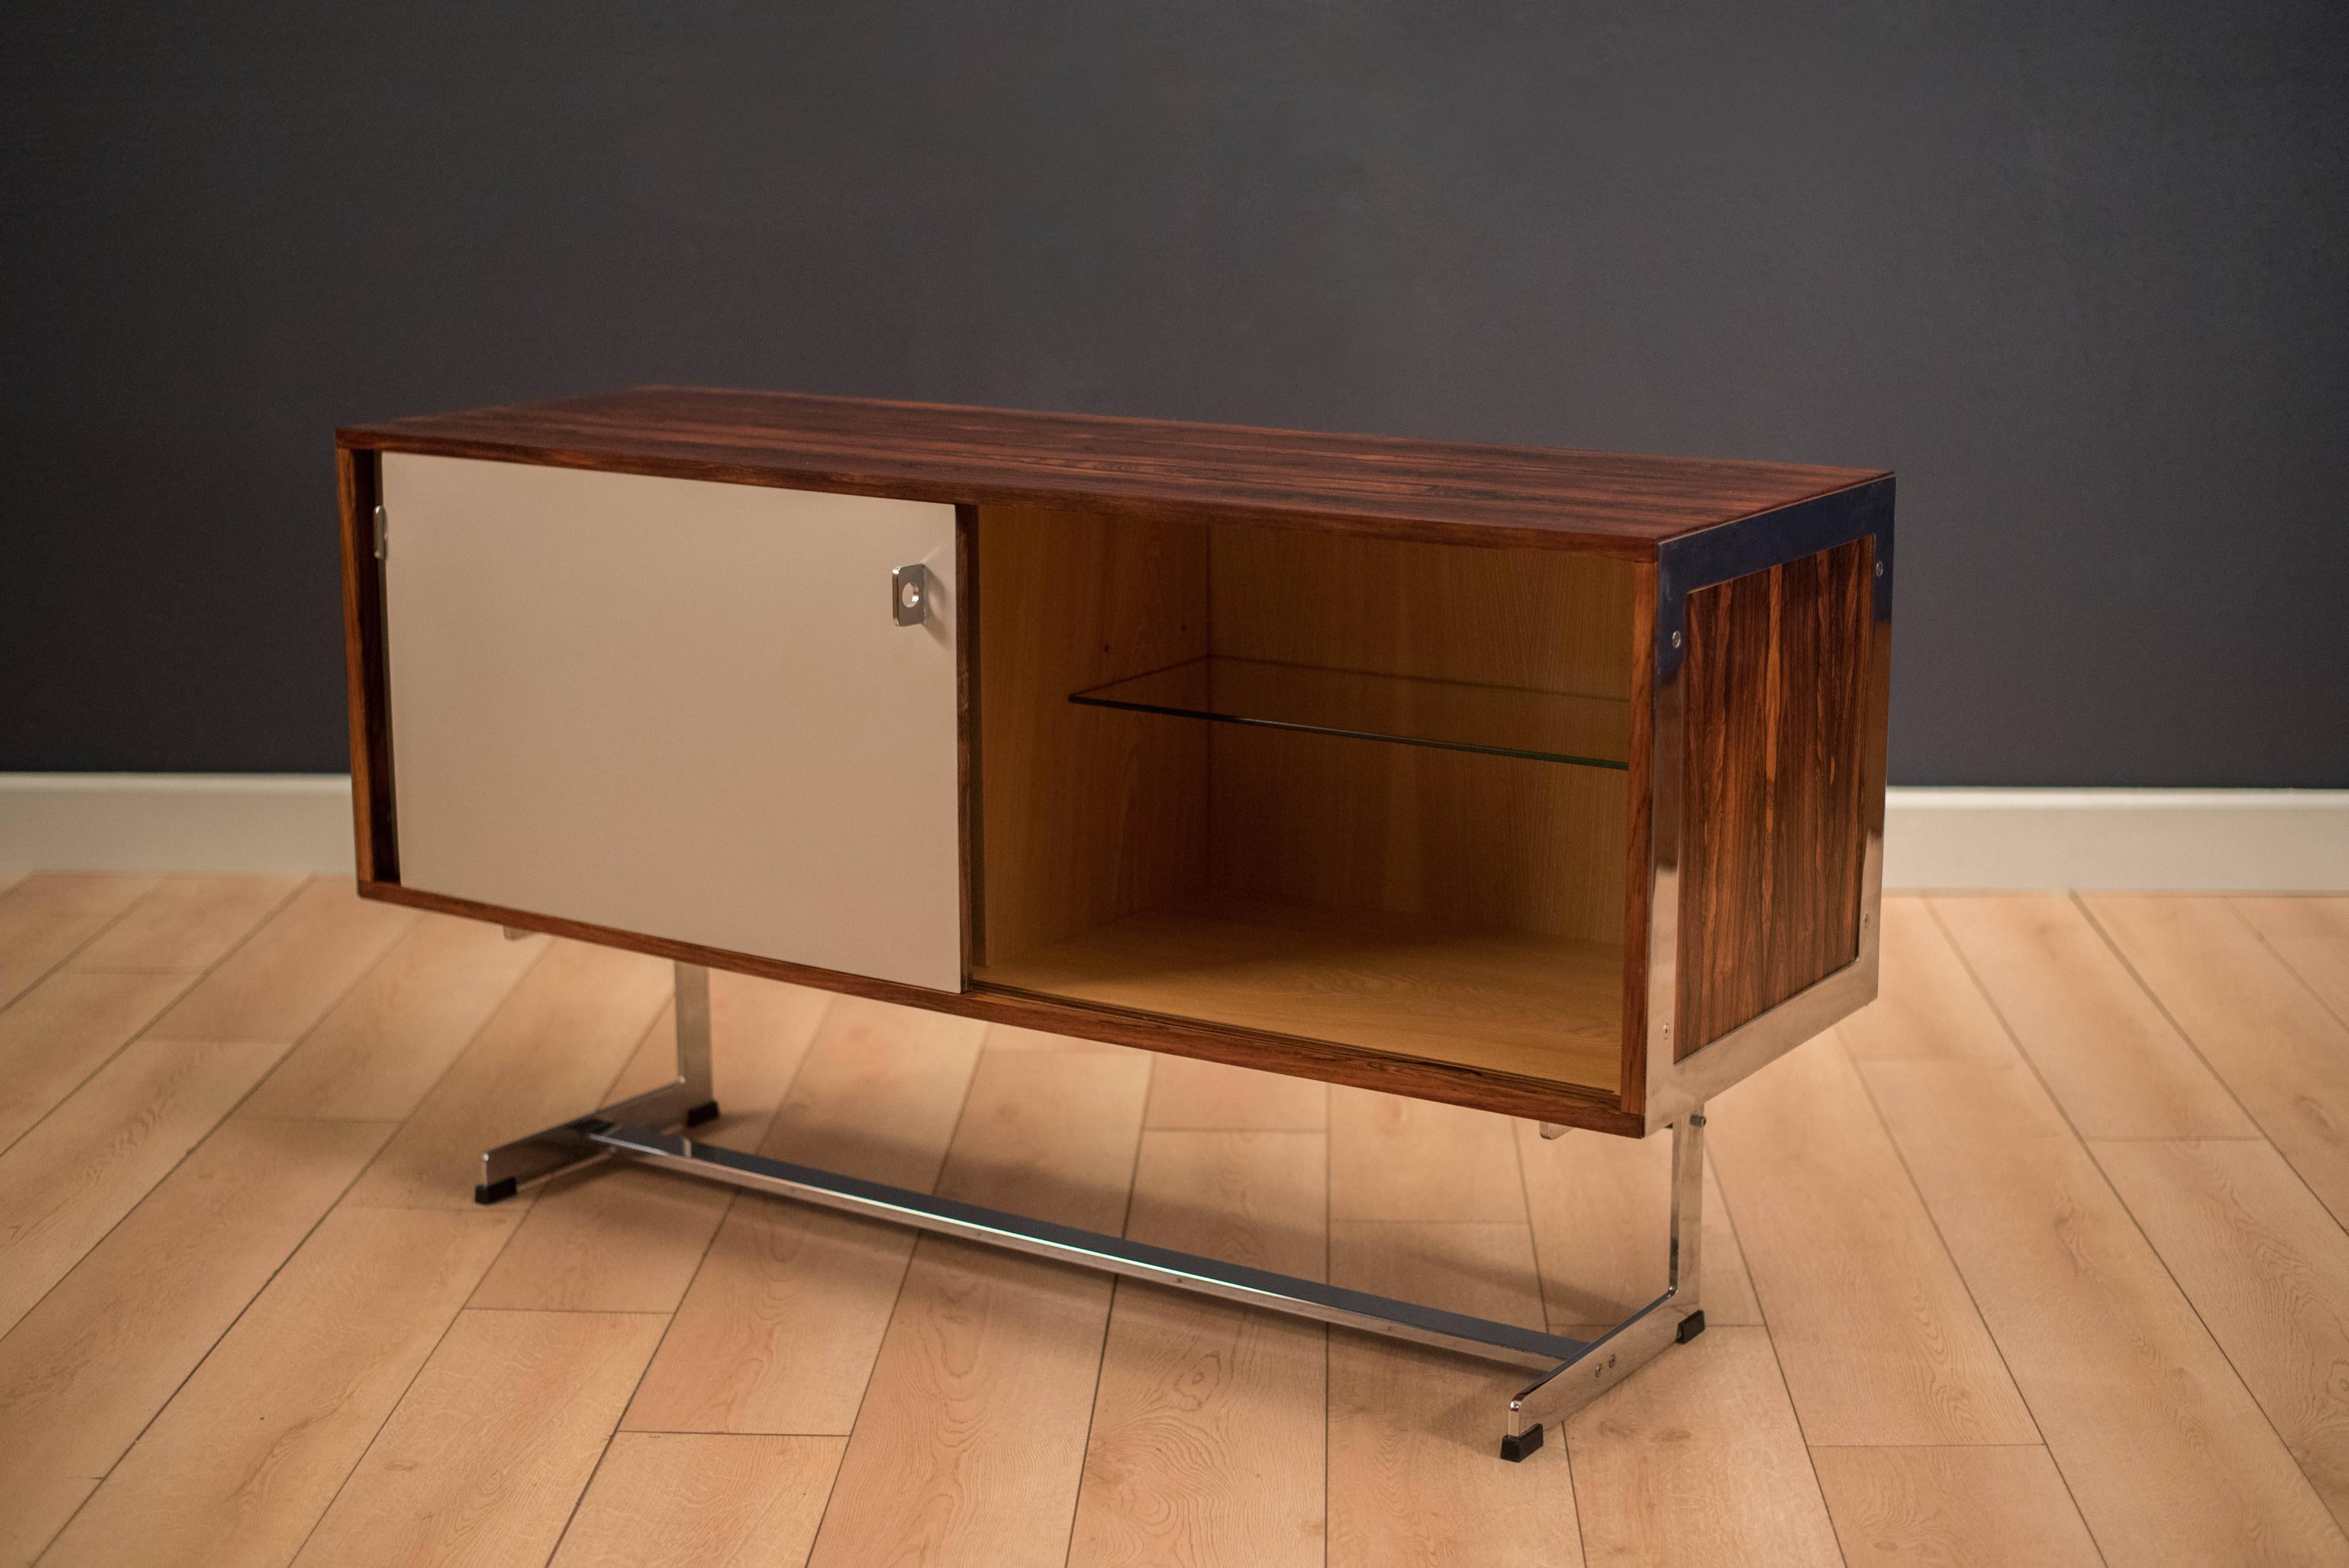 British Vintage Rosewood and Chrome Credenza by Merrow Associates